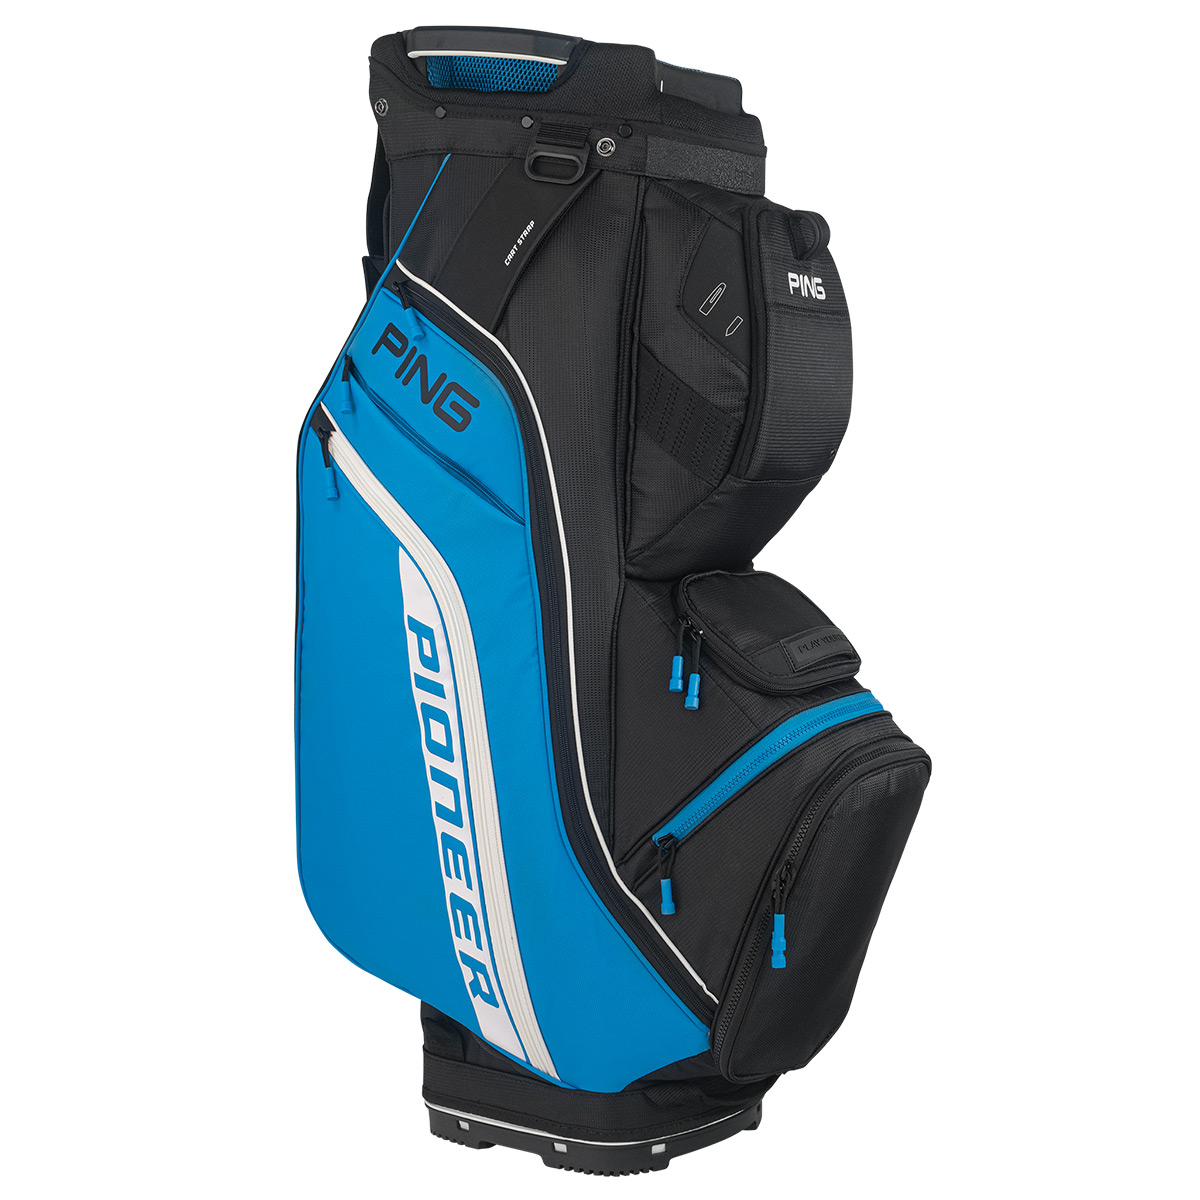 PING Pioneer 214 Golf Cart Bag from american golf